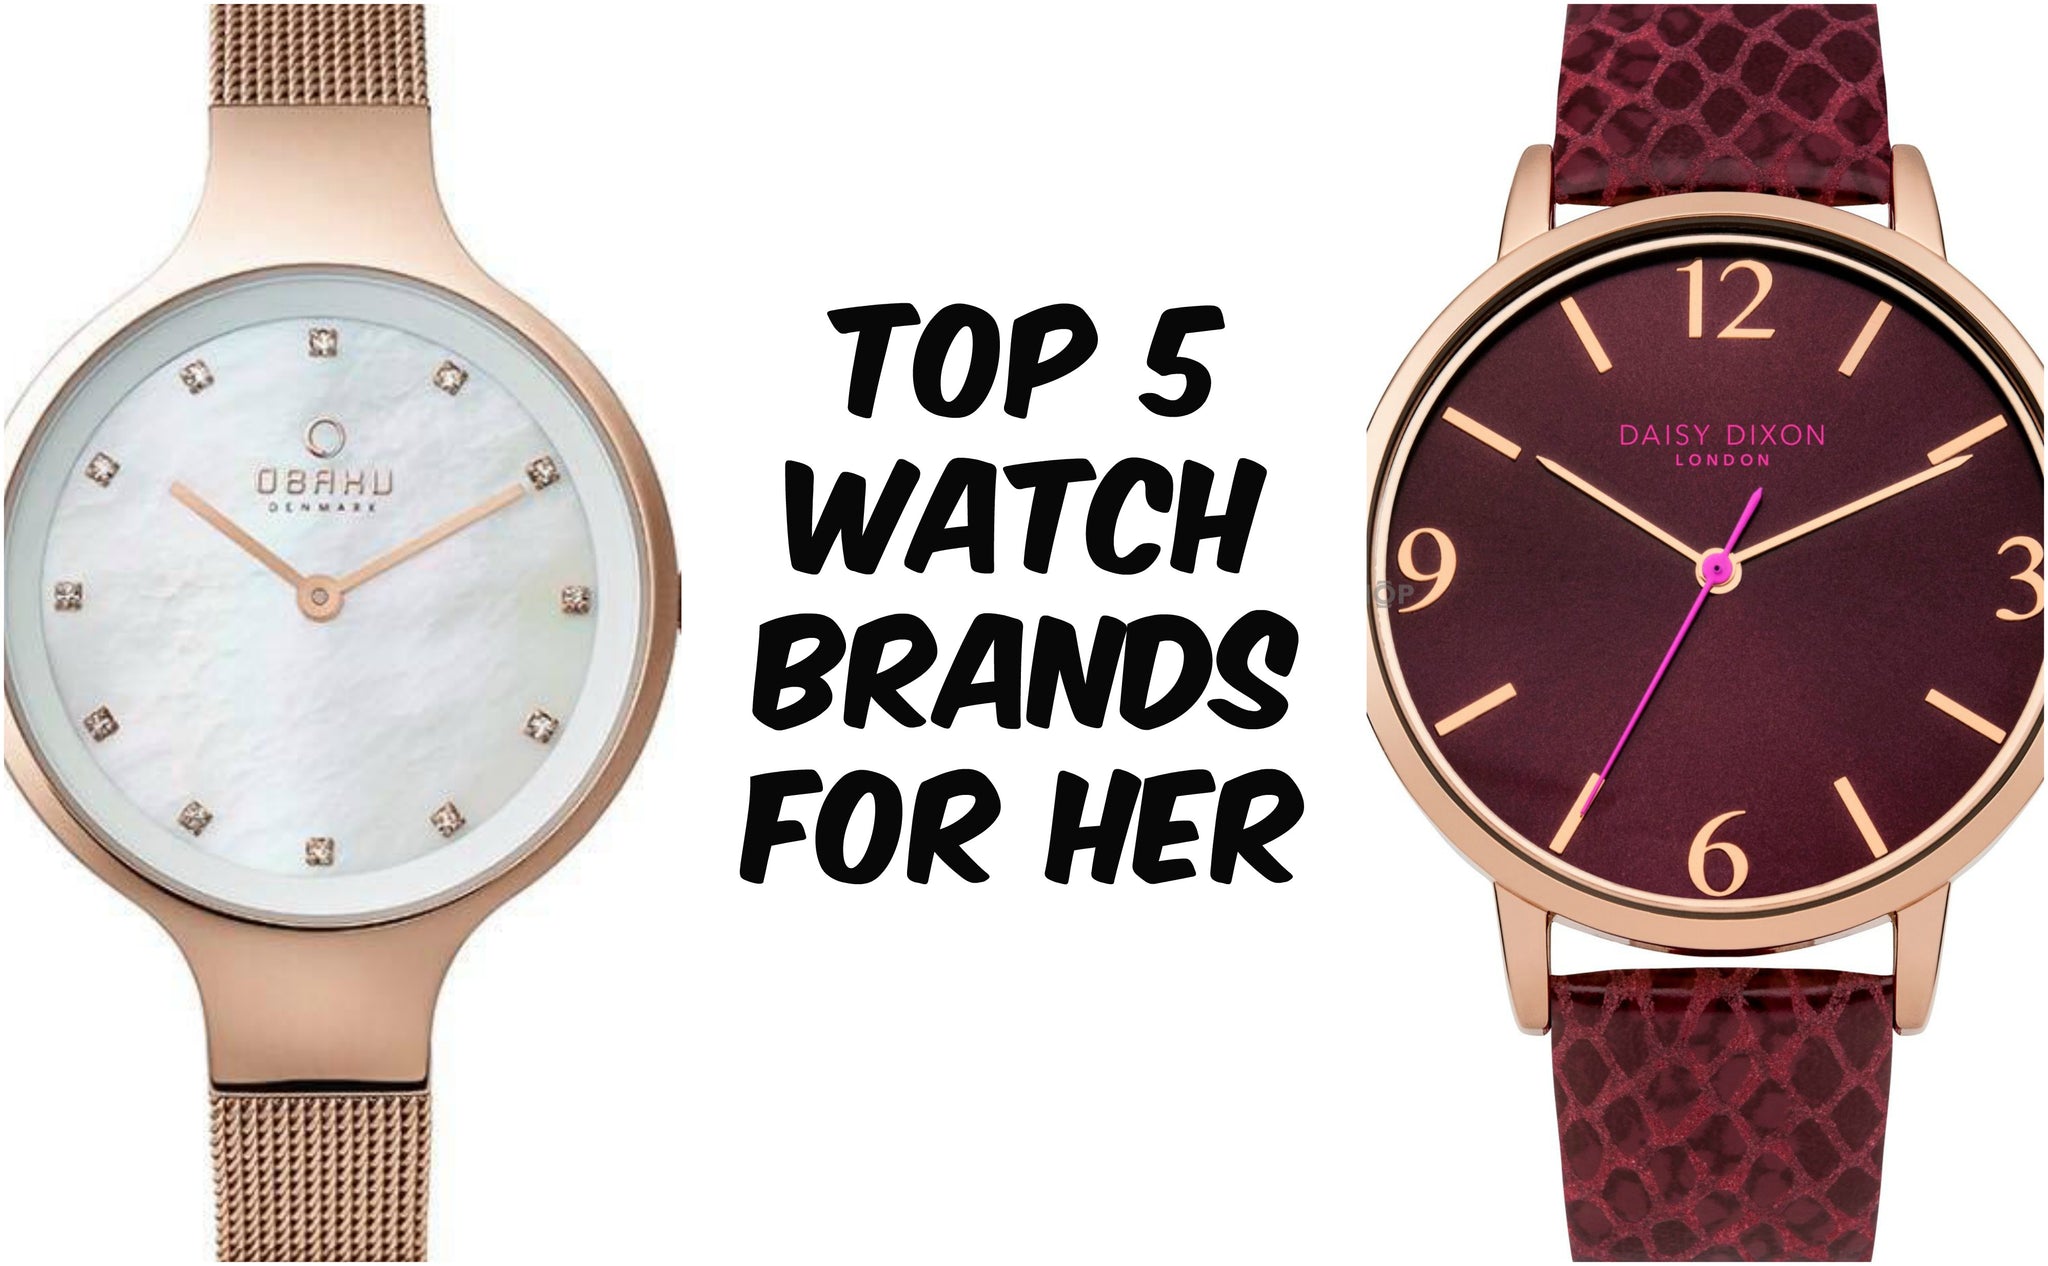 Top 5 watch brands for her at Stevens Jewellers